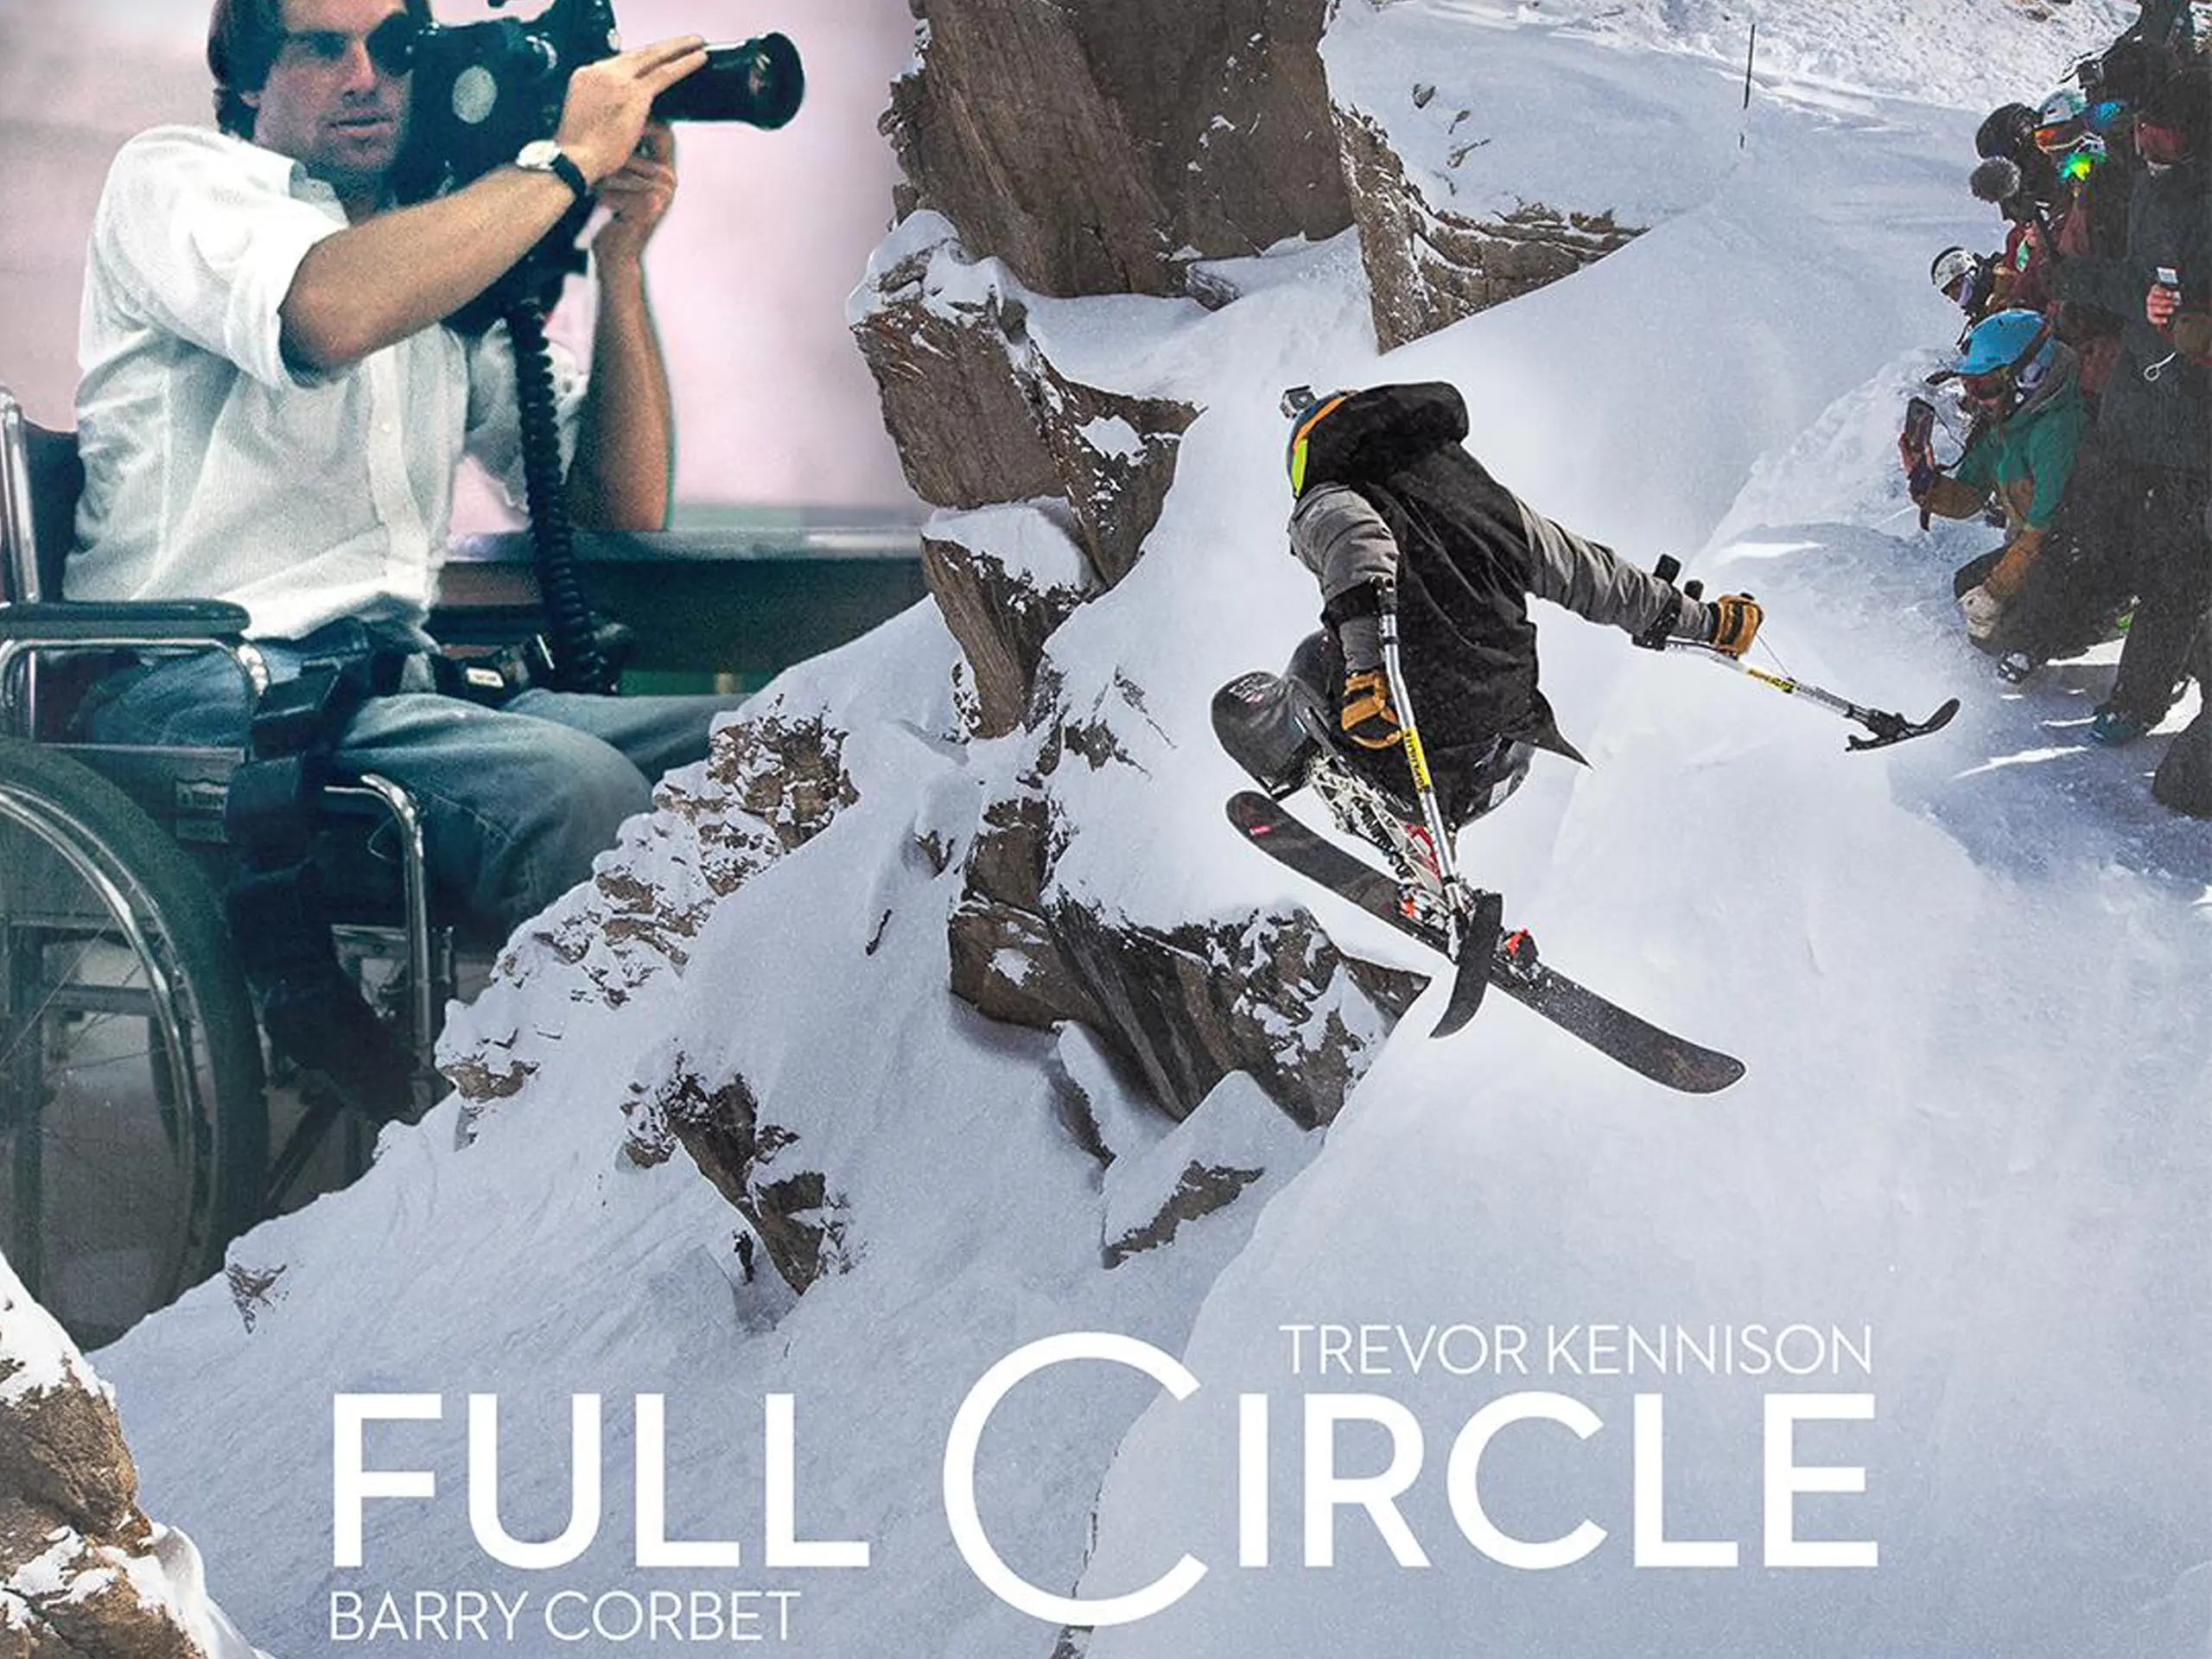 Full Circle – A Story of Post Traumatic Growth